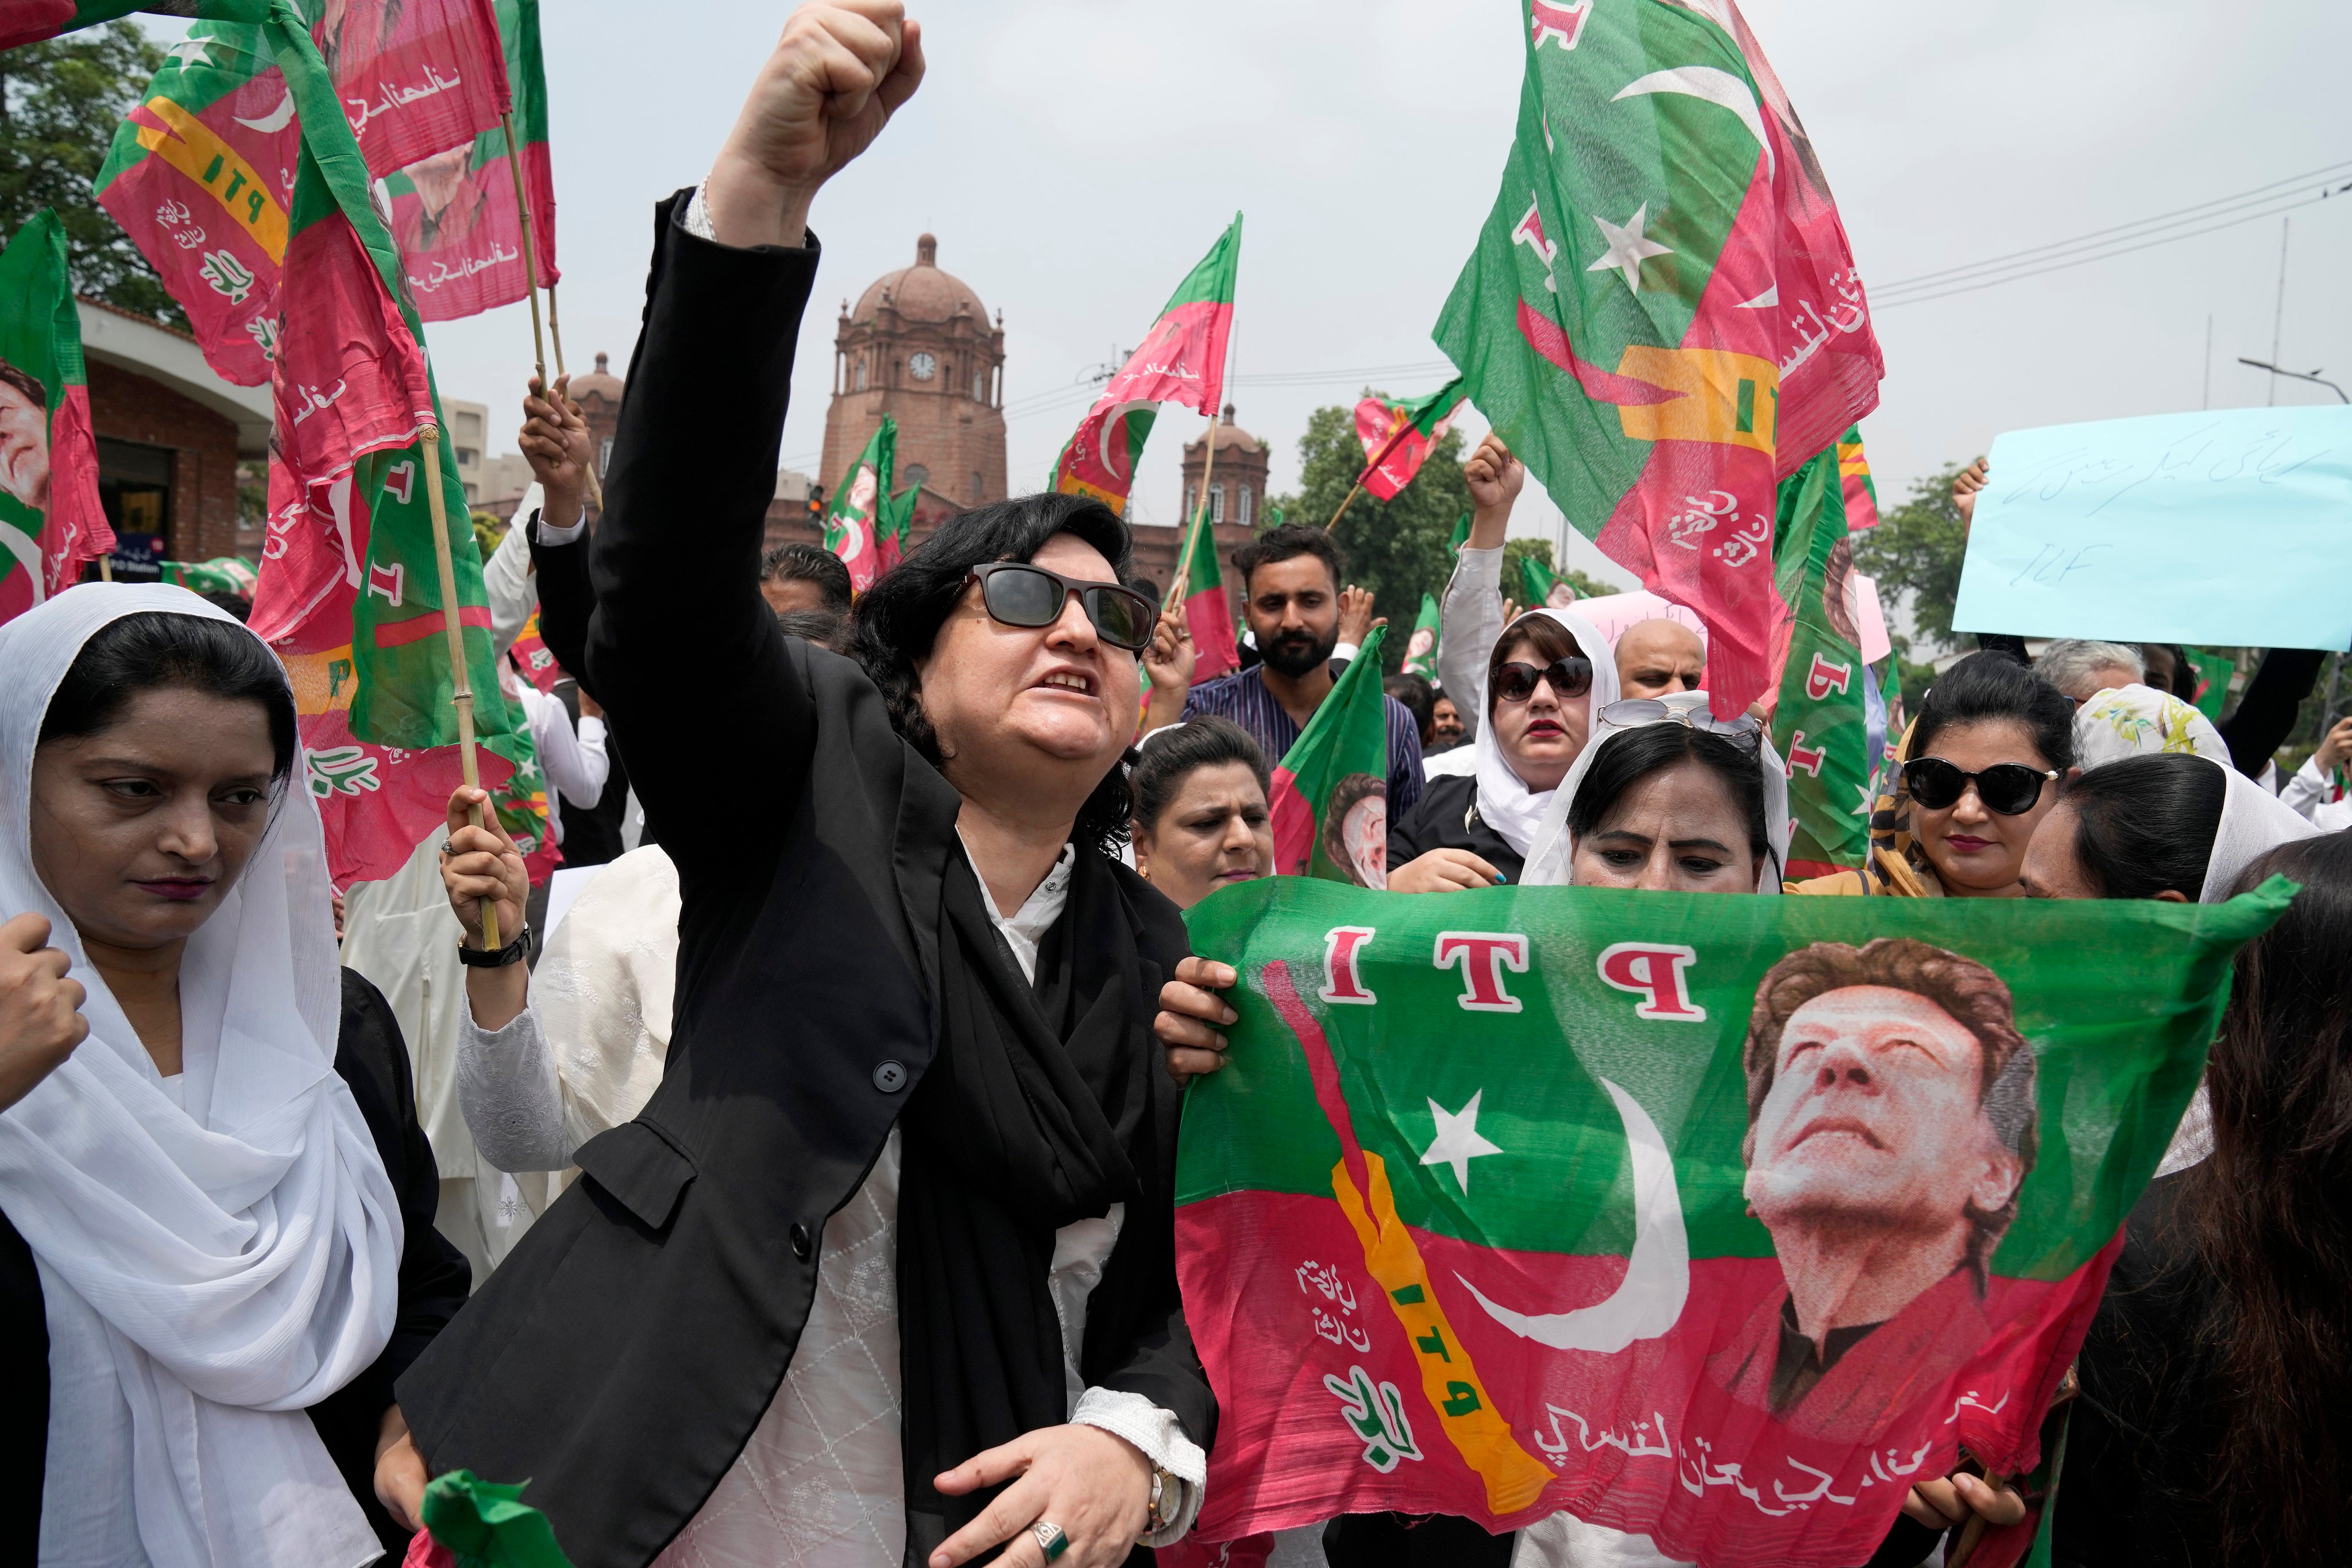 Supporters of former Pakistan prime minister Imran Khan hold a protest against Khan’s imprisonment in Lahore, Pakistan, on August 7. Khan has been jailed for three years after being convicted of corruption. Photo: AP